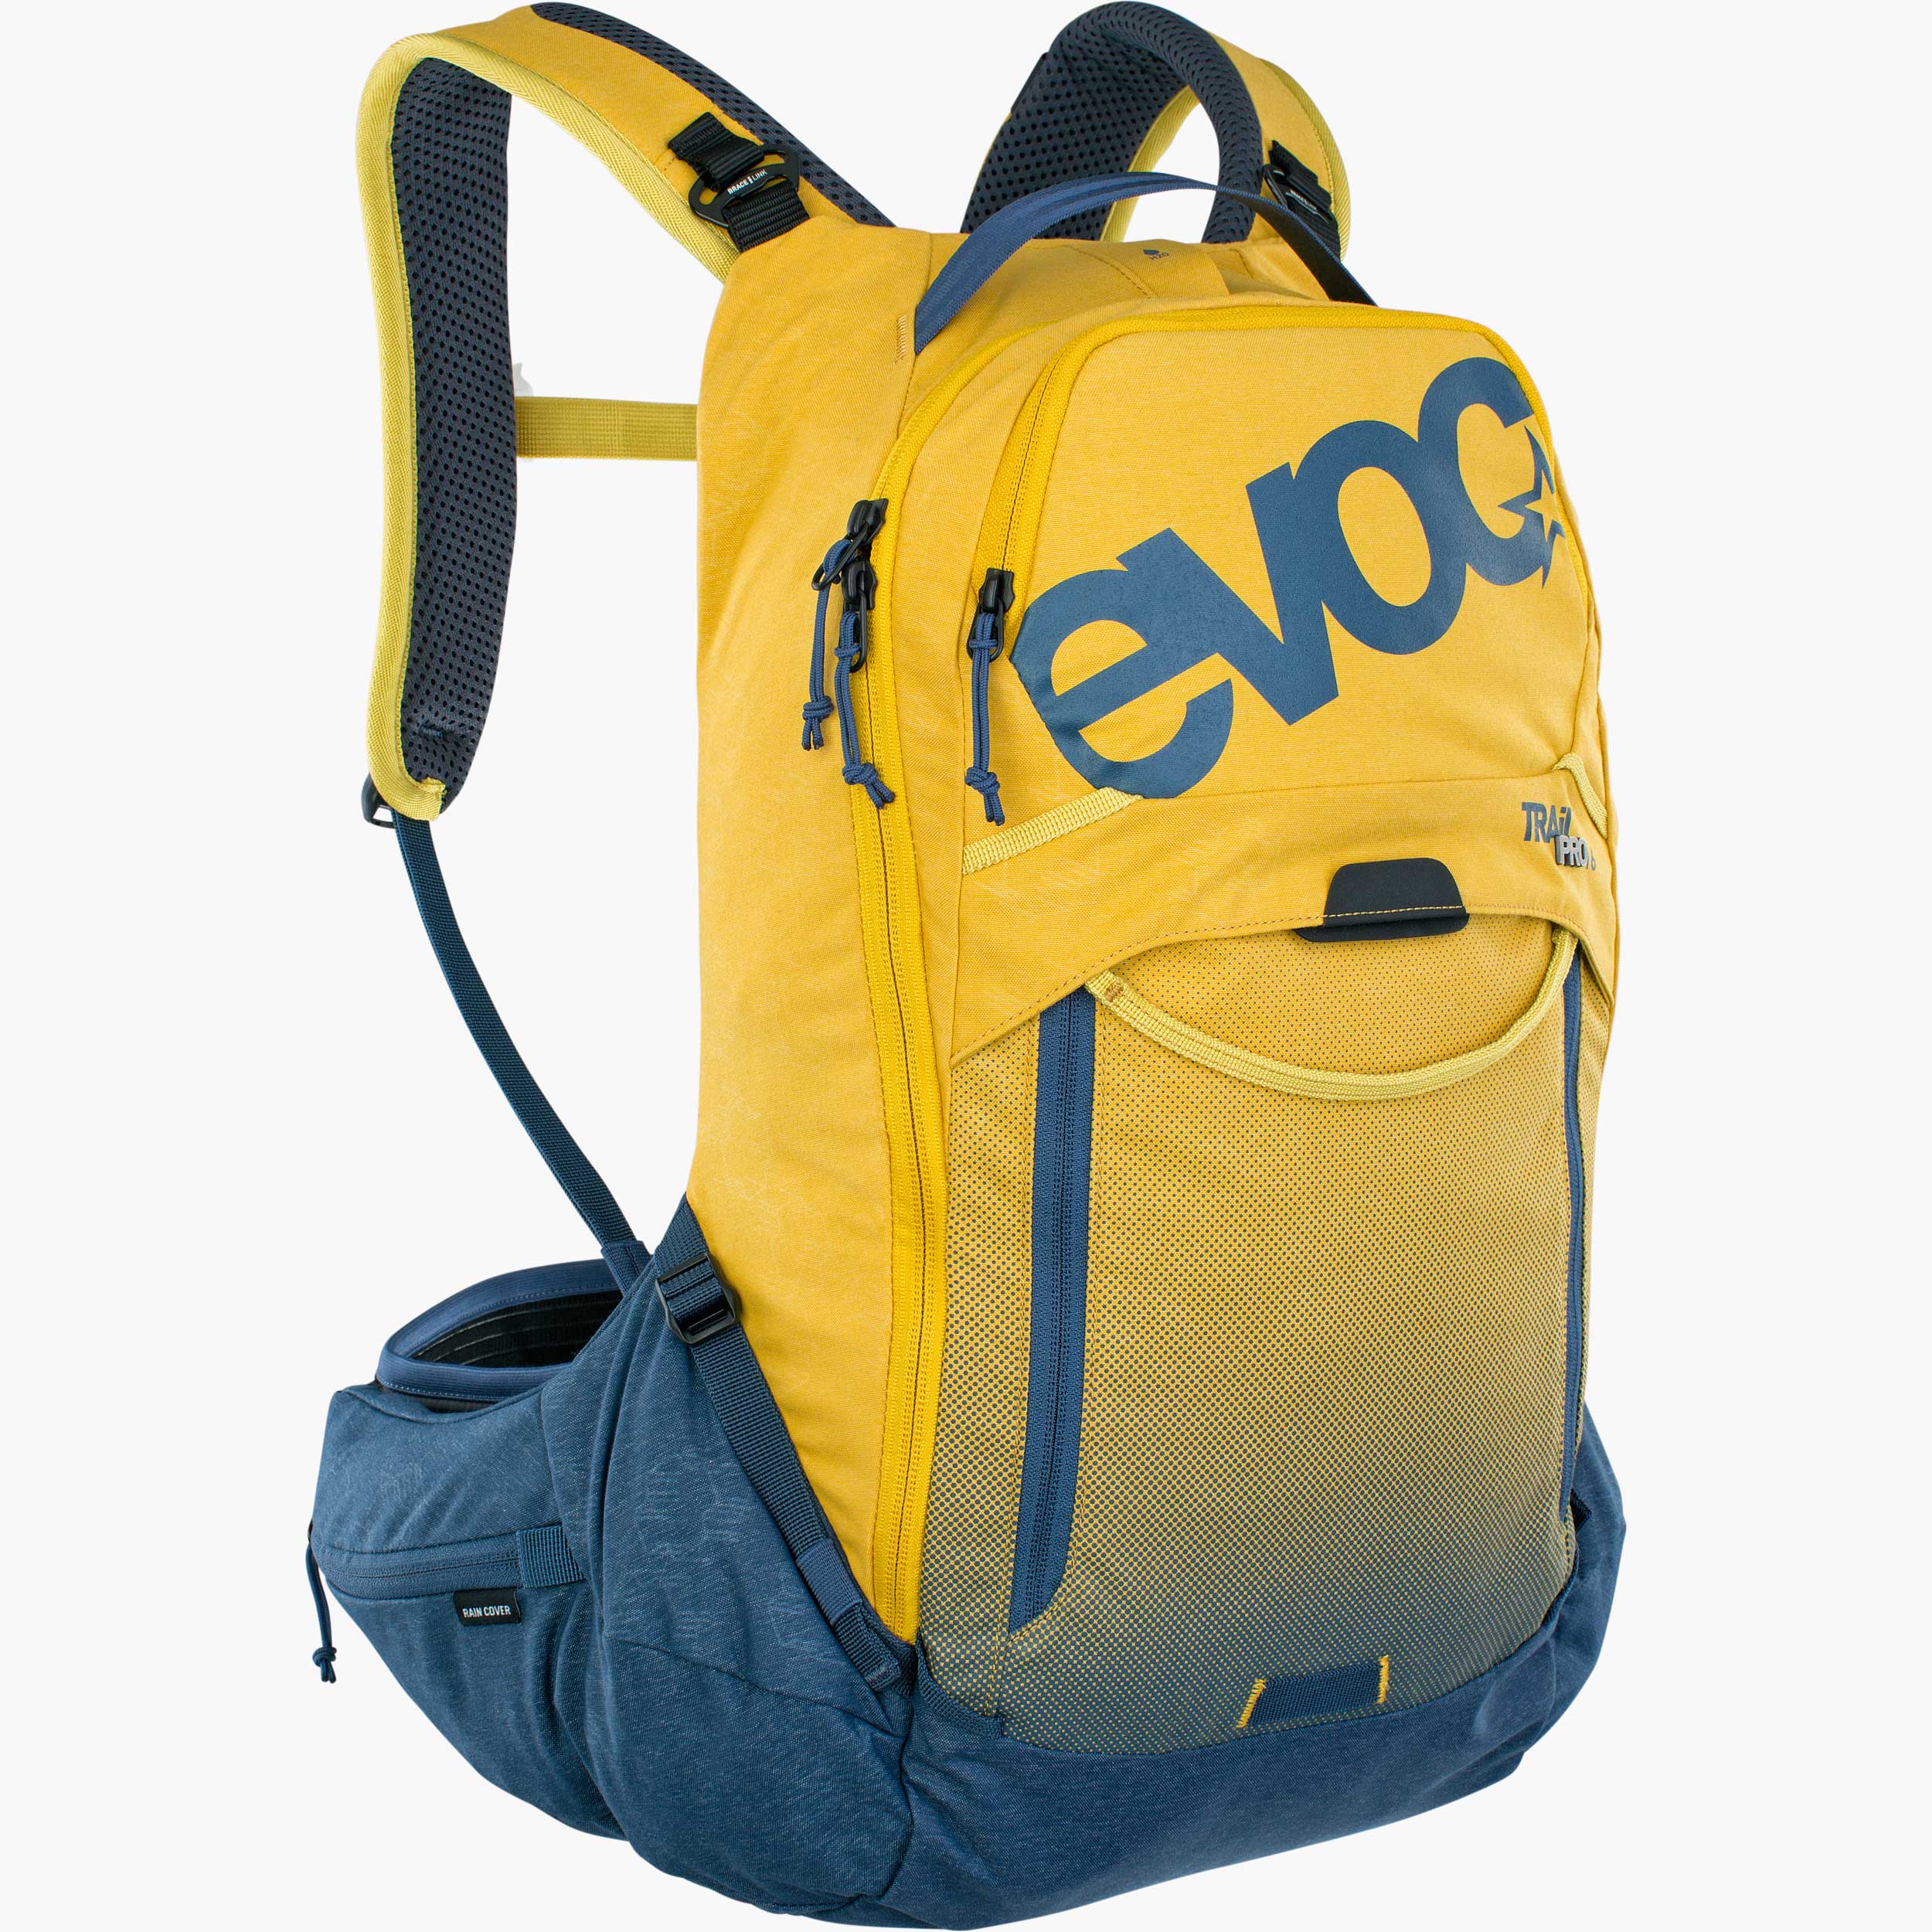 Home - Backpacks, Bags, Protection Wear - EVOC - PROTECTIVE SPORTS 